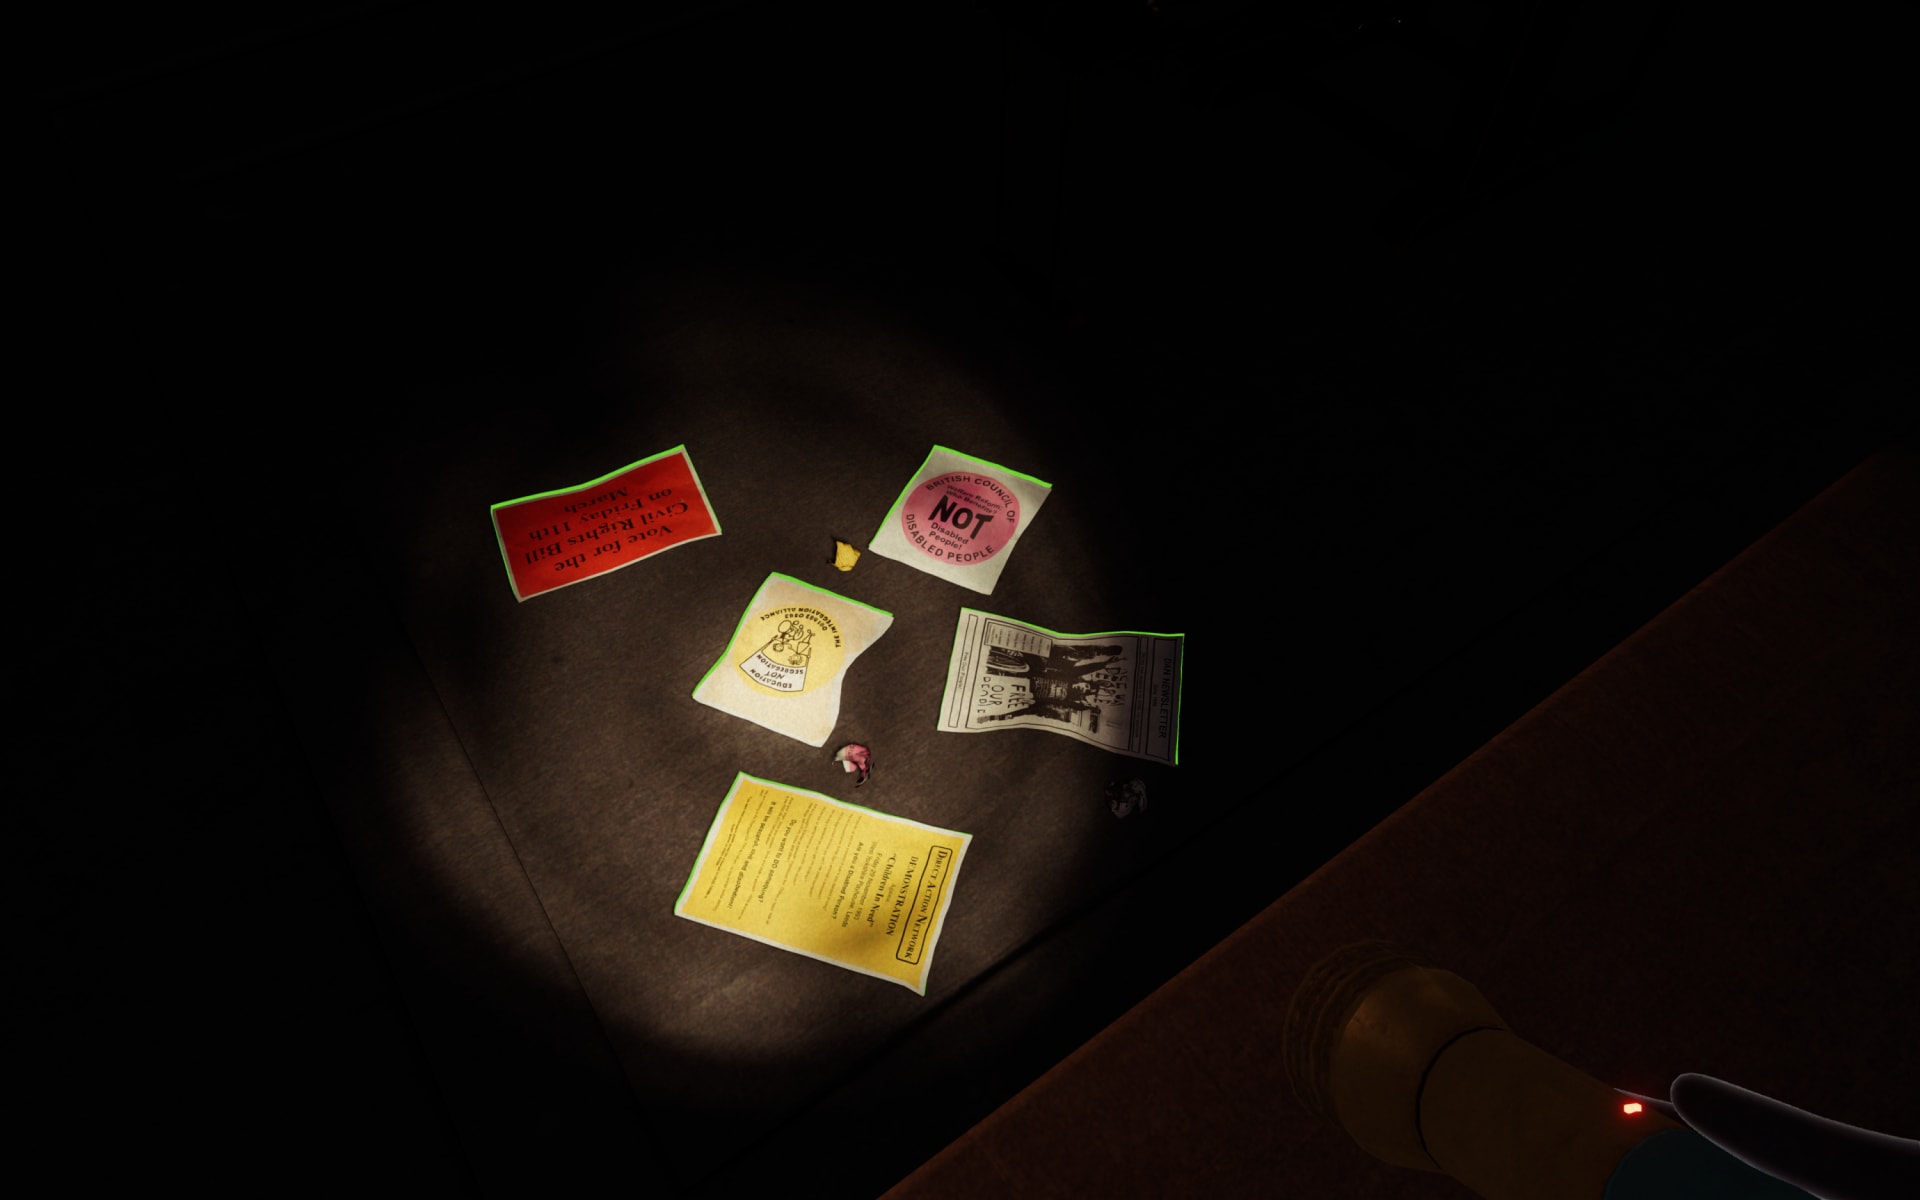 In-game screenshot focusing on a collection of paper materials strewn across the floor. The space is poorly lit, perspective limited by the reach of the torchlight. The only discernible objects are 5 pieces of paper, some slightly crumpled, laying on the floor. Only some of the text is legible - ‘Vote for the Civil Rights Bill on Friday 11th March’ and ‘Direct Action Network’.